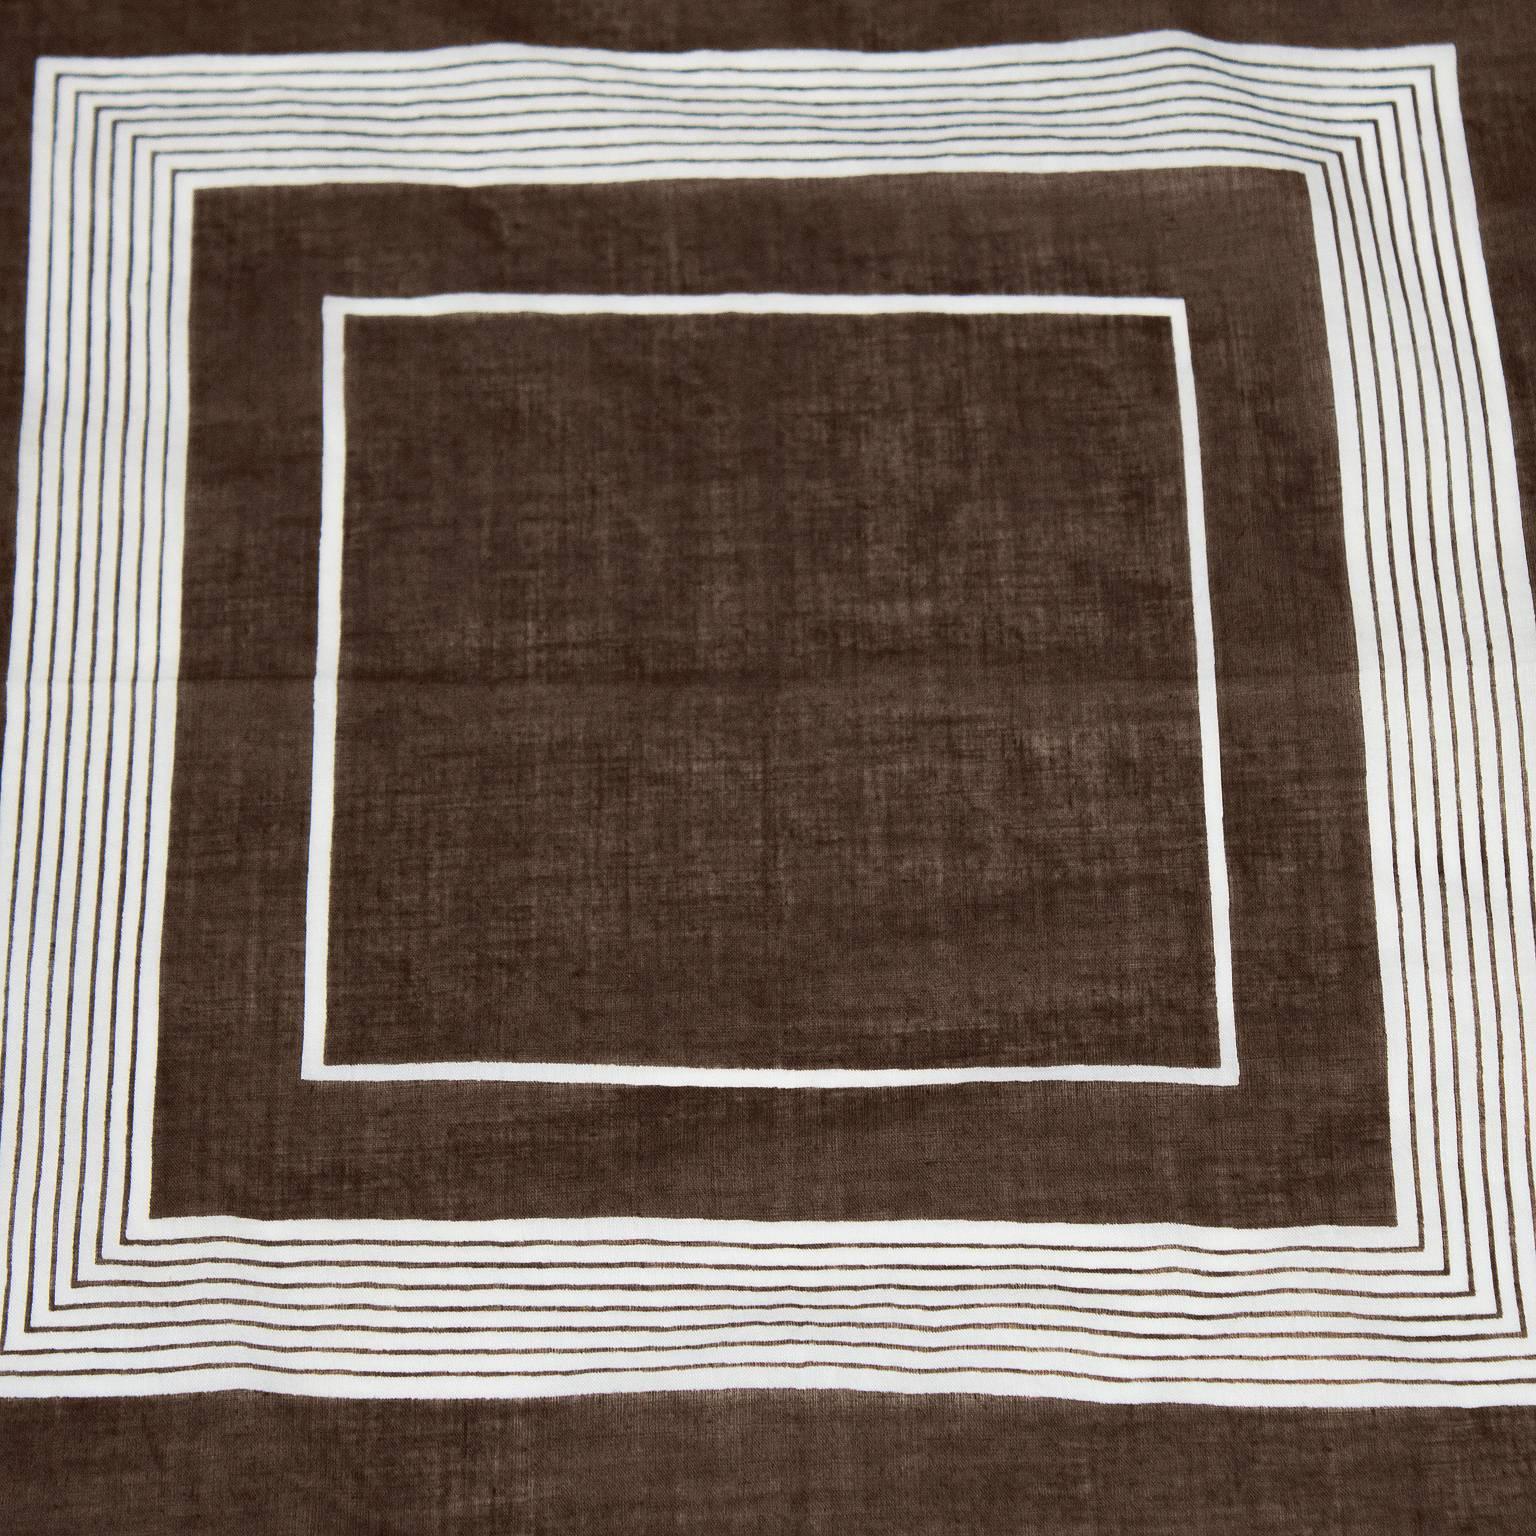 Unisex styled brown and cream cotton square scarf by Yves Saint Laurent from the 1970's. The scarf features geometric cream squares on a brown background. In excellent condition. Signed Yves Saint Laurent on the corner. Measures 25